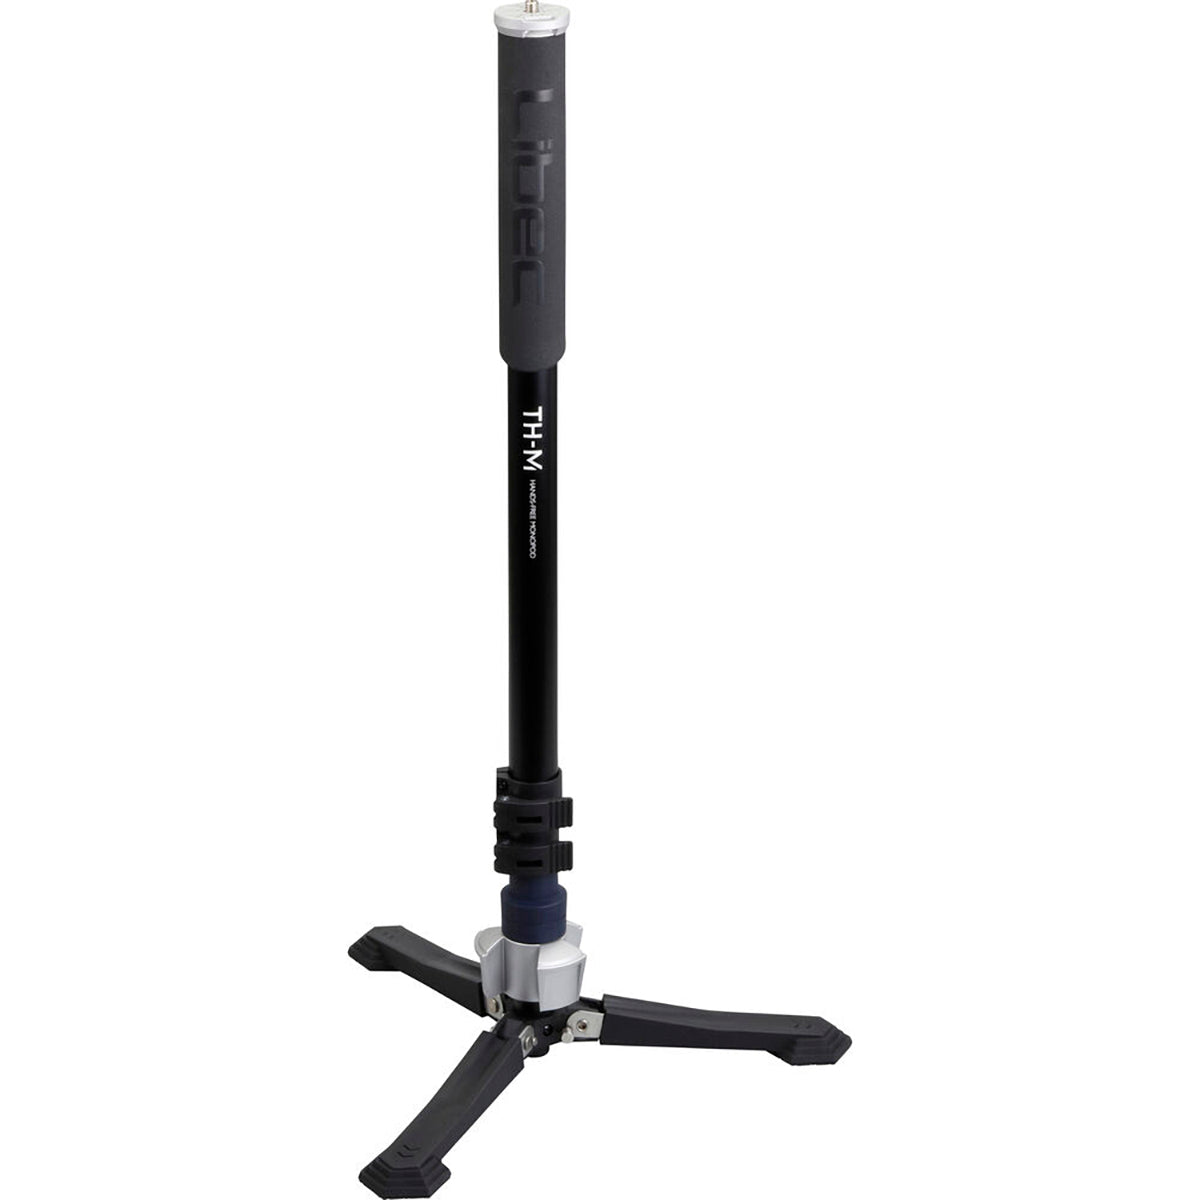 Libec Professional video monopod for free-stand operations with carrying bag payload 8kg